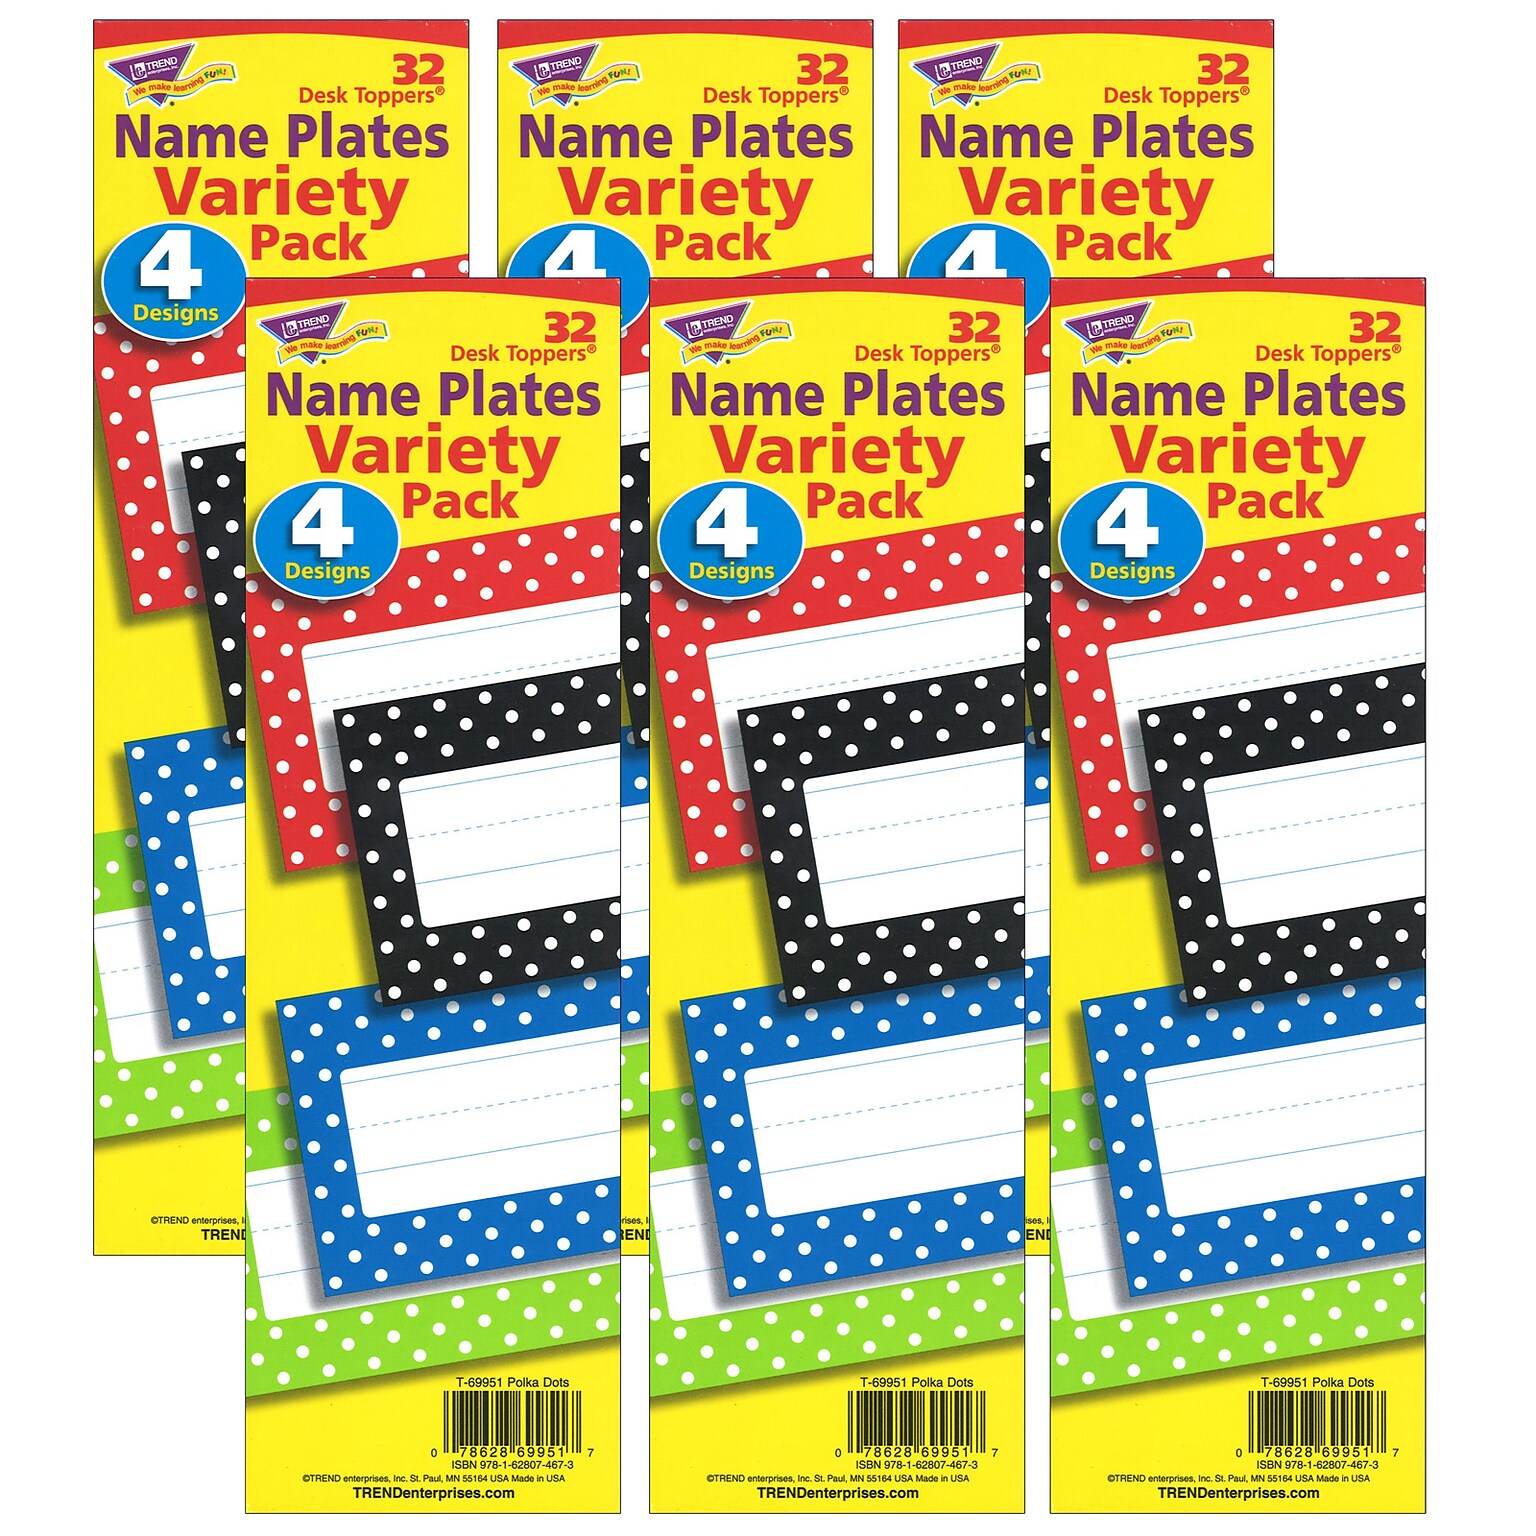 TREND Polka Dots Desk Toppers® Nameplates Variety Pack, 2.875 x 9.5, 32 Per Pack, 6 Packs (T-69951-6)